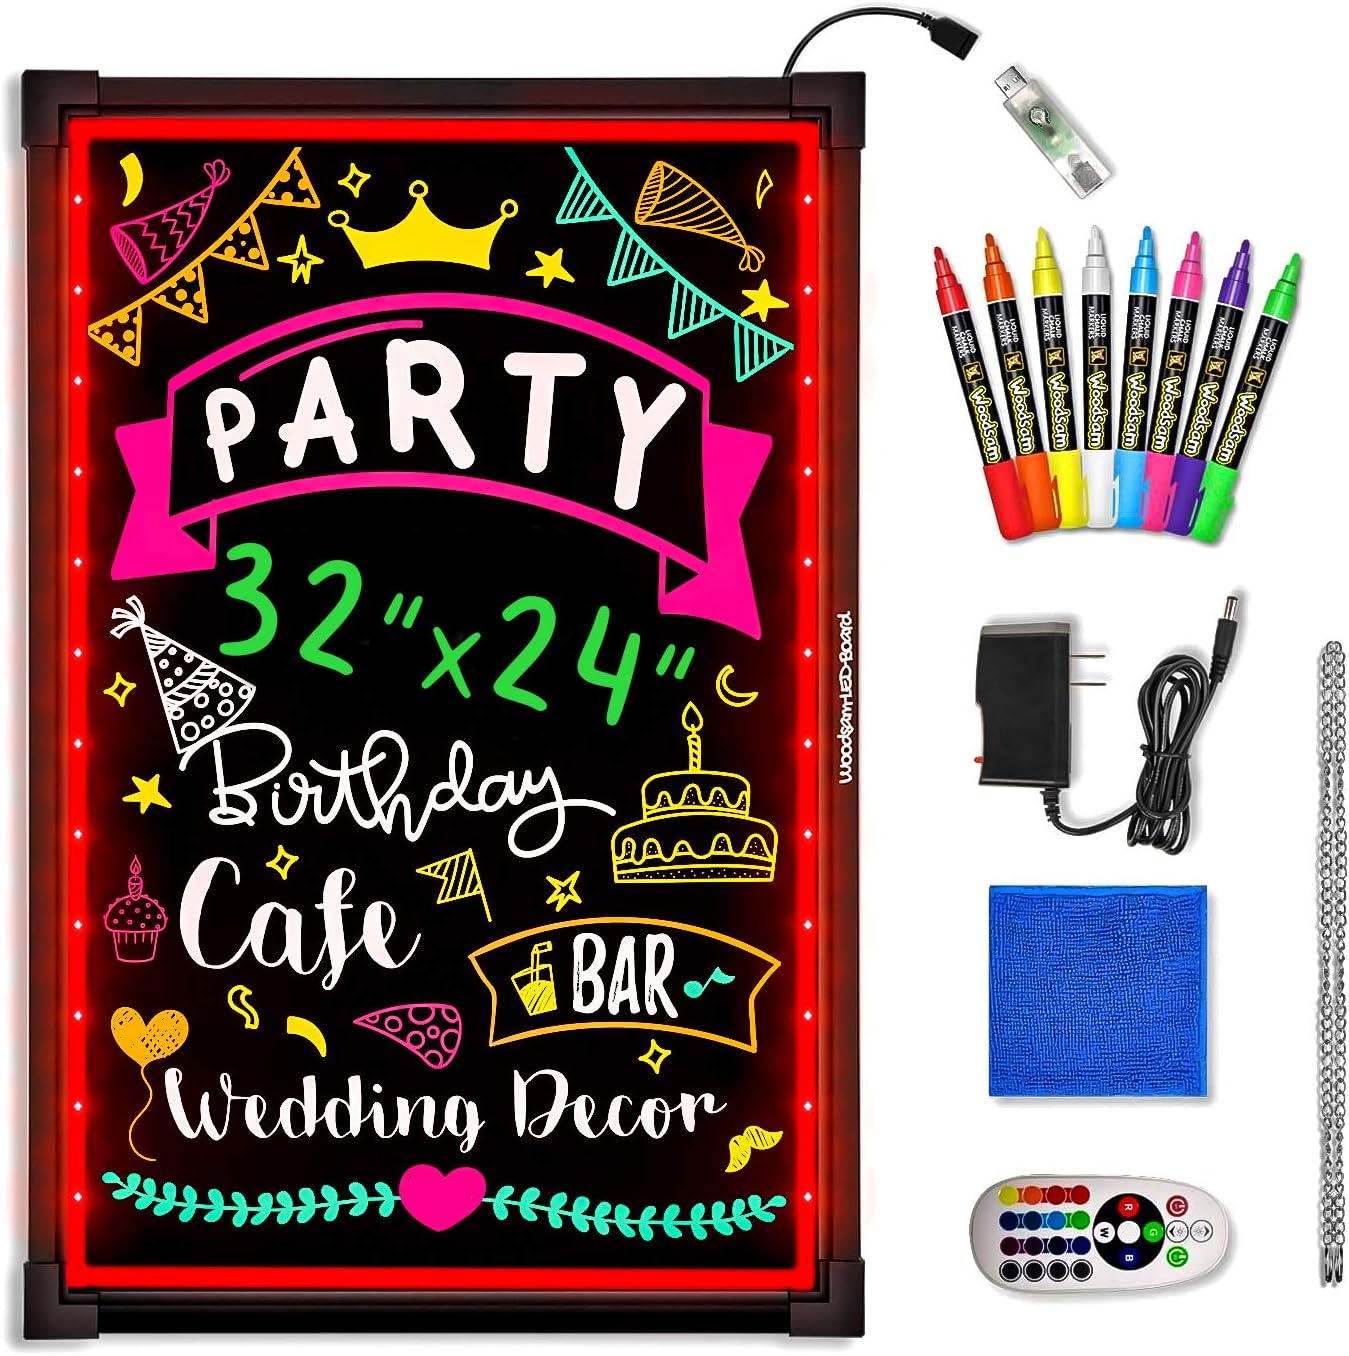 LED Message Writing Board - 32"x24" Flashing Illuminated Erasable Neon Sign With 8 Fluorescent Chalk Markers - Perfect For Shop/Cafe/Bar/Menu/Wedding/Decoration/Promotion/School